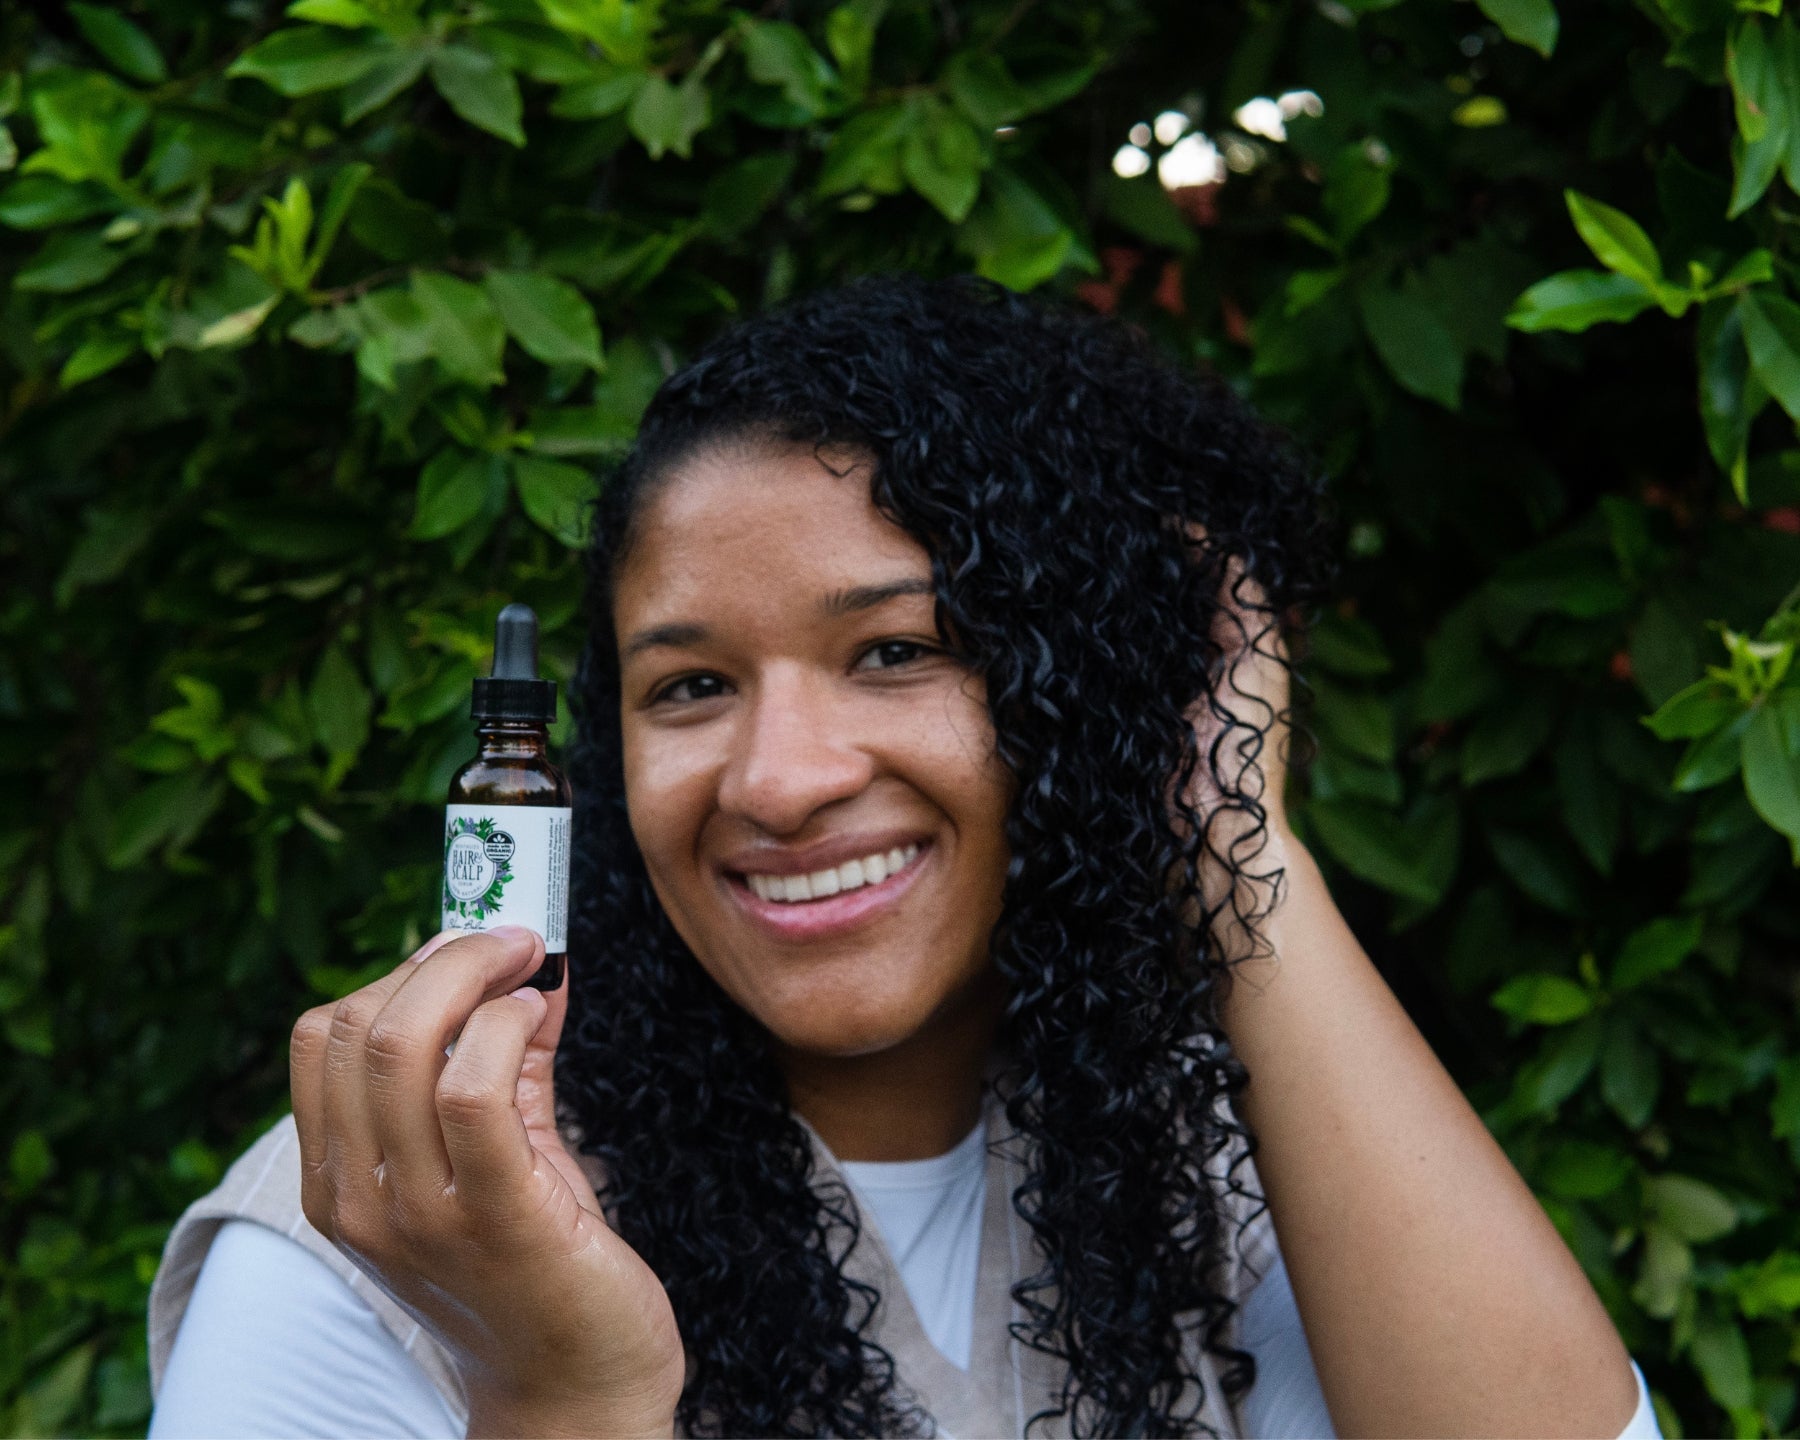 A smiling woman scrunches her hair while holding a bottle of the Revitalize Hair & Scalp Serum.